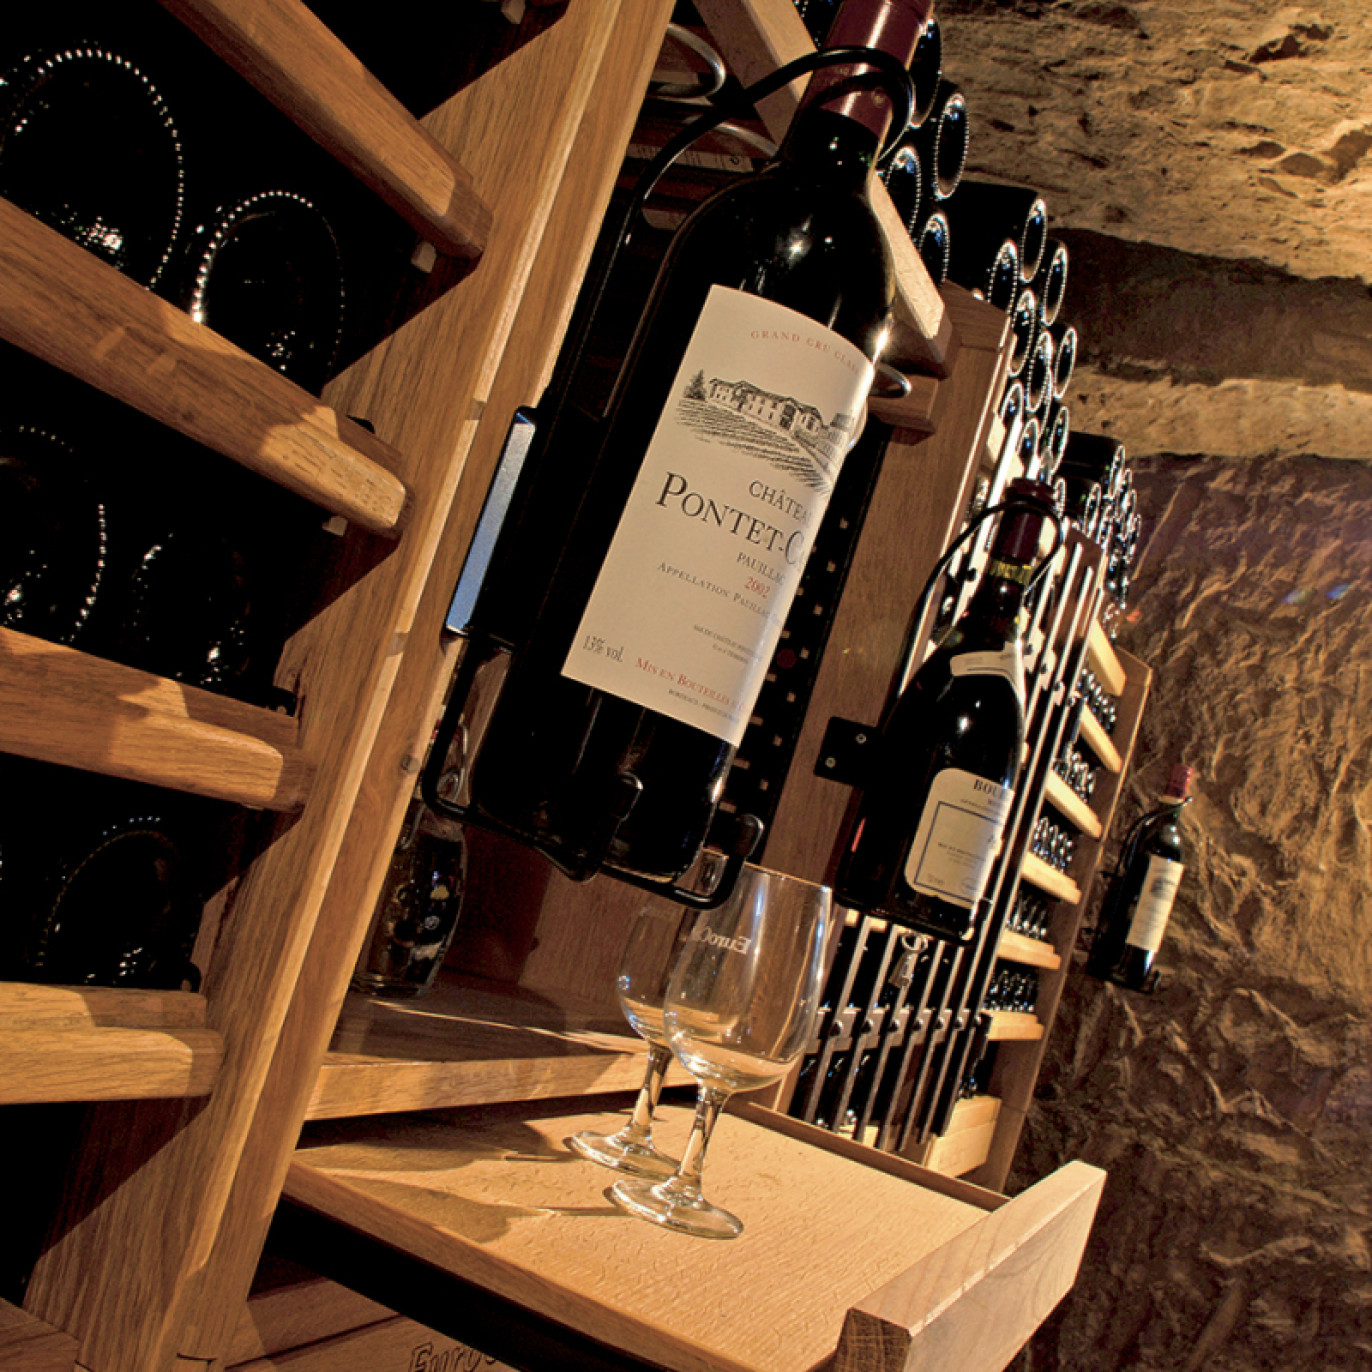 Black metal support for displaying bottles in a wine cellar - Modulothèque